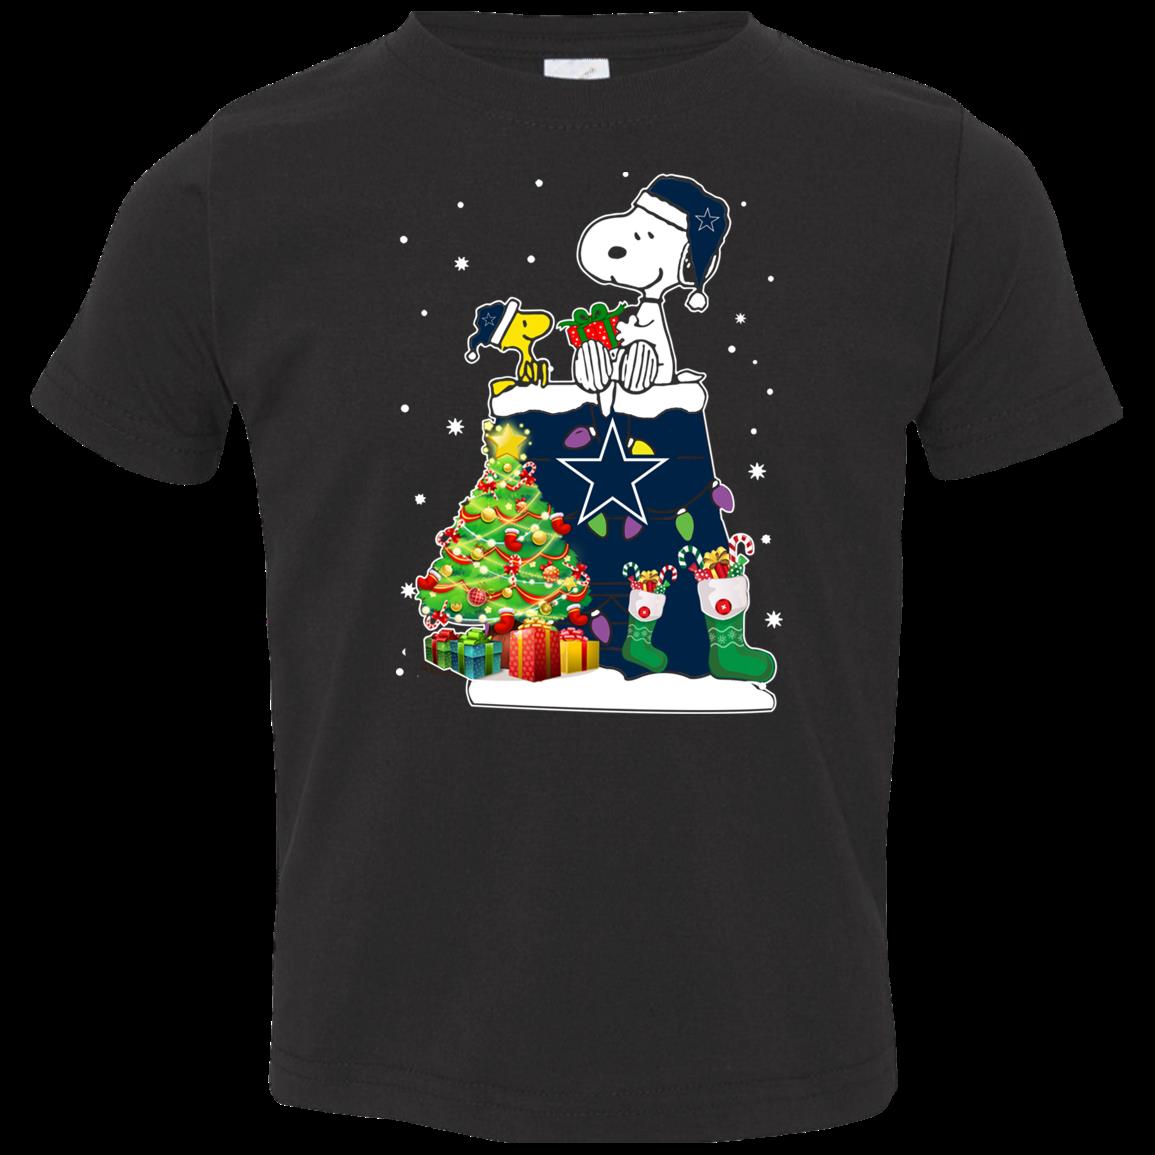 Dallas Cowboys Snoopy & Woodstock Christmas Shirt 3321 Rabbit Skins Toddler  Jersey T-shirt funny shirts, gift shirts, Tshirt, Hoodie, Sweatshirt , Long  Sleeve, Youth, Graphic Tee » Cool Gifts for You - Mfamilygift